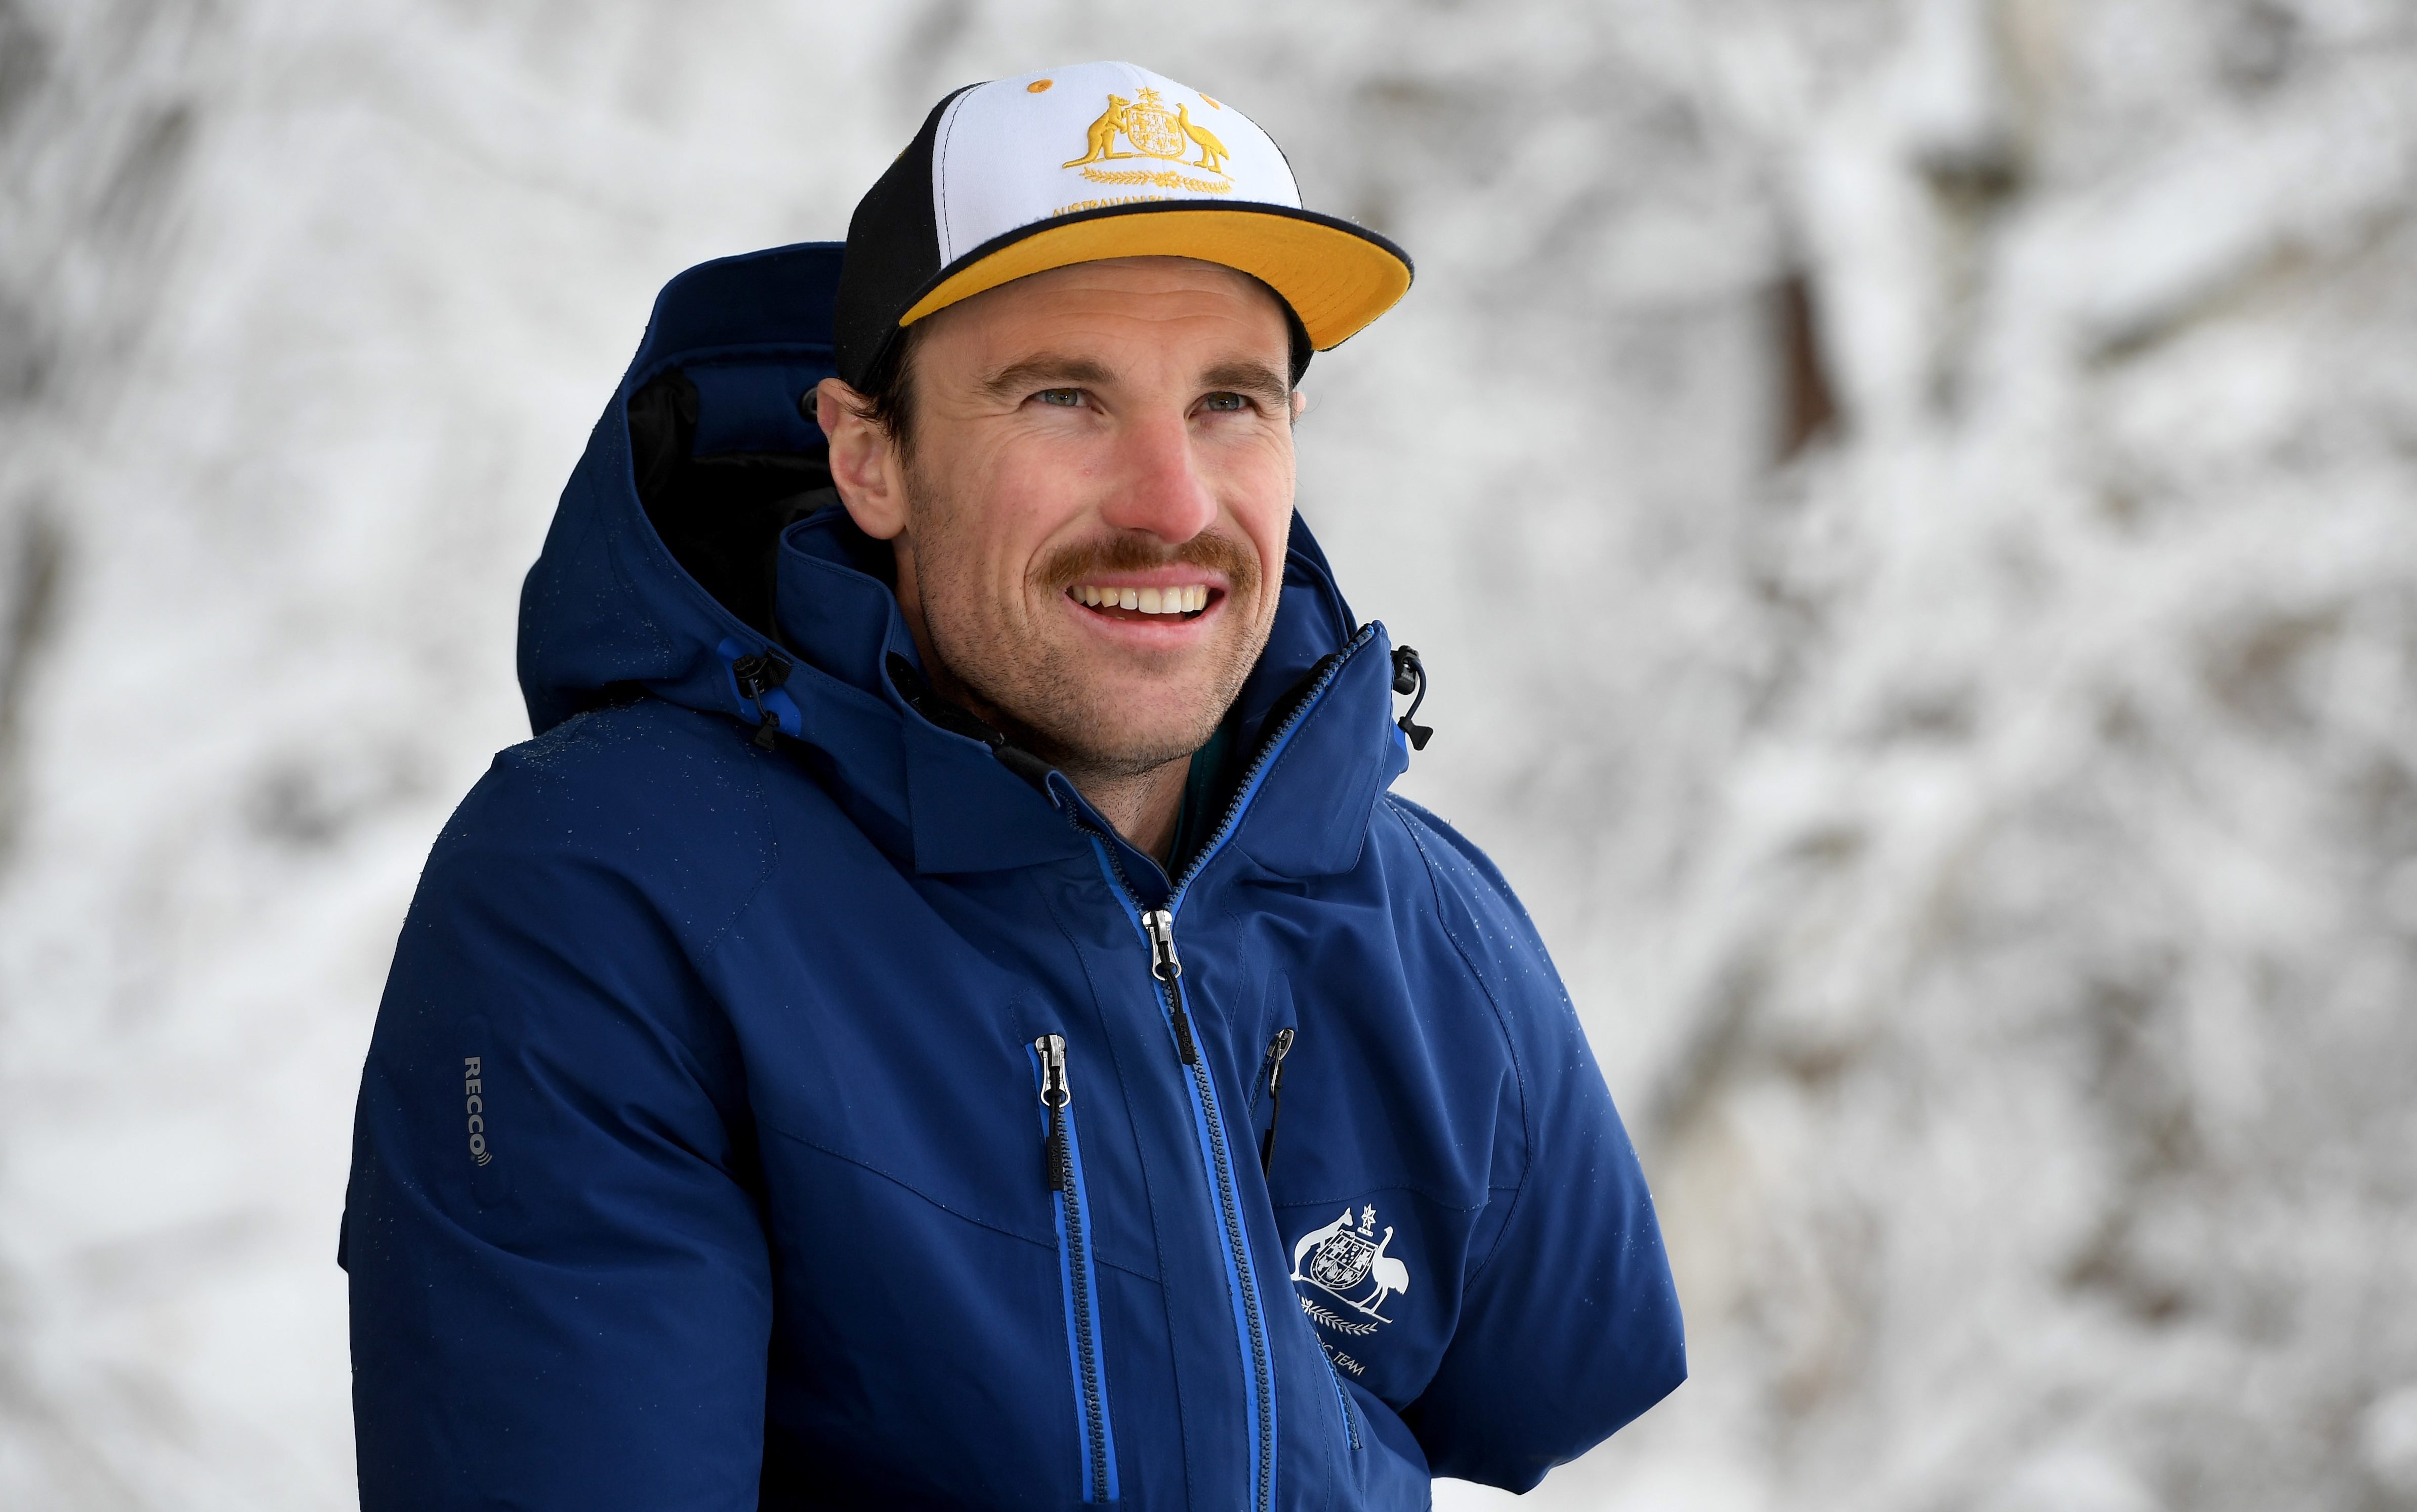 Nominees announced for 2019 Australian Ski and Snowboard Awards